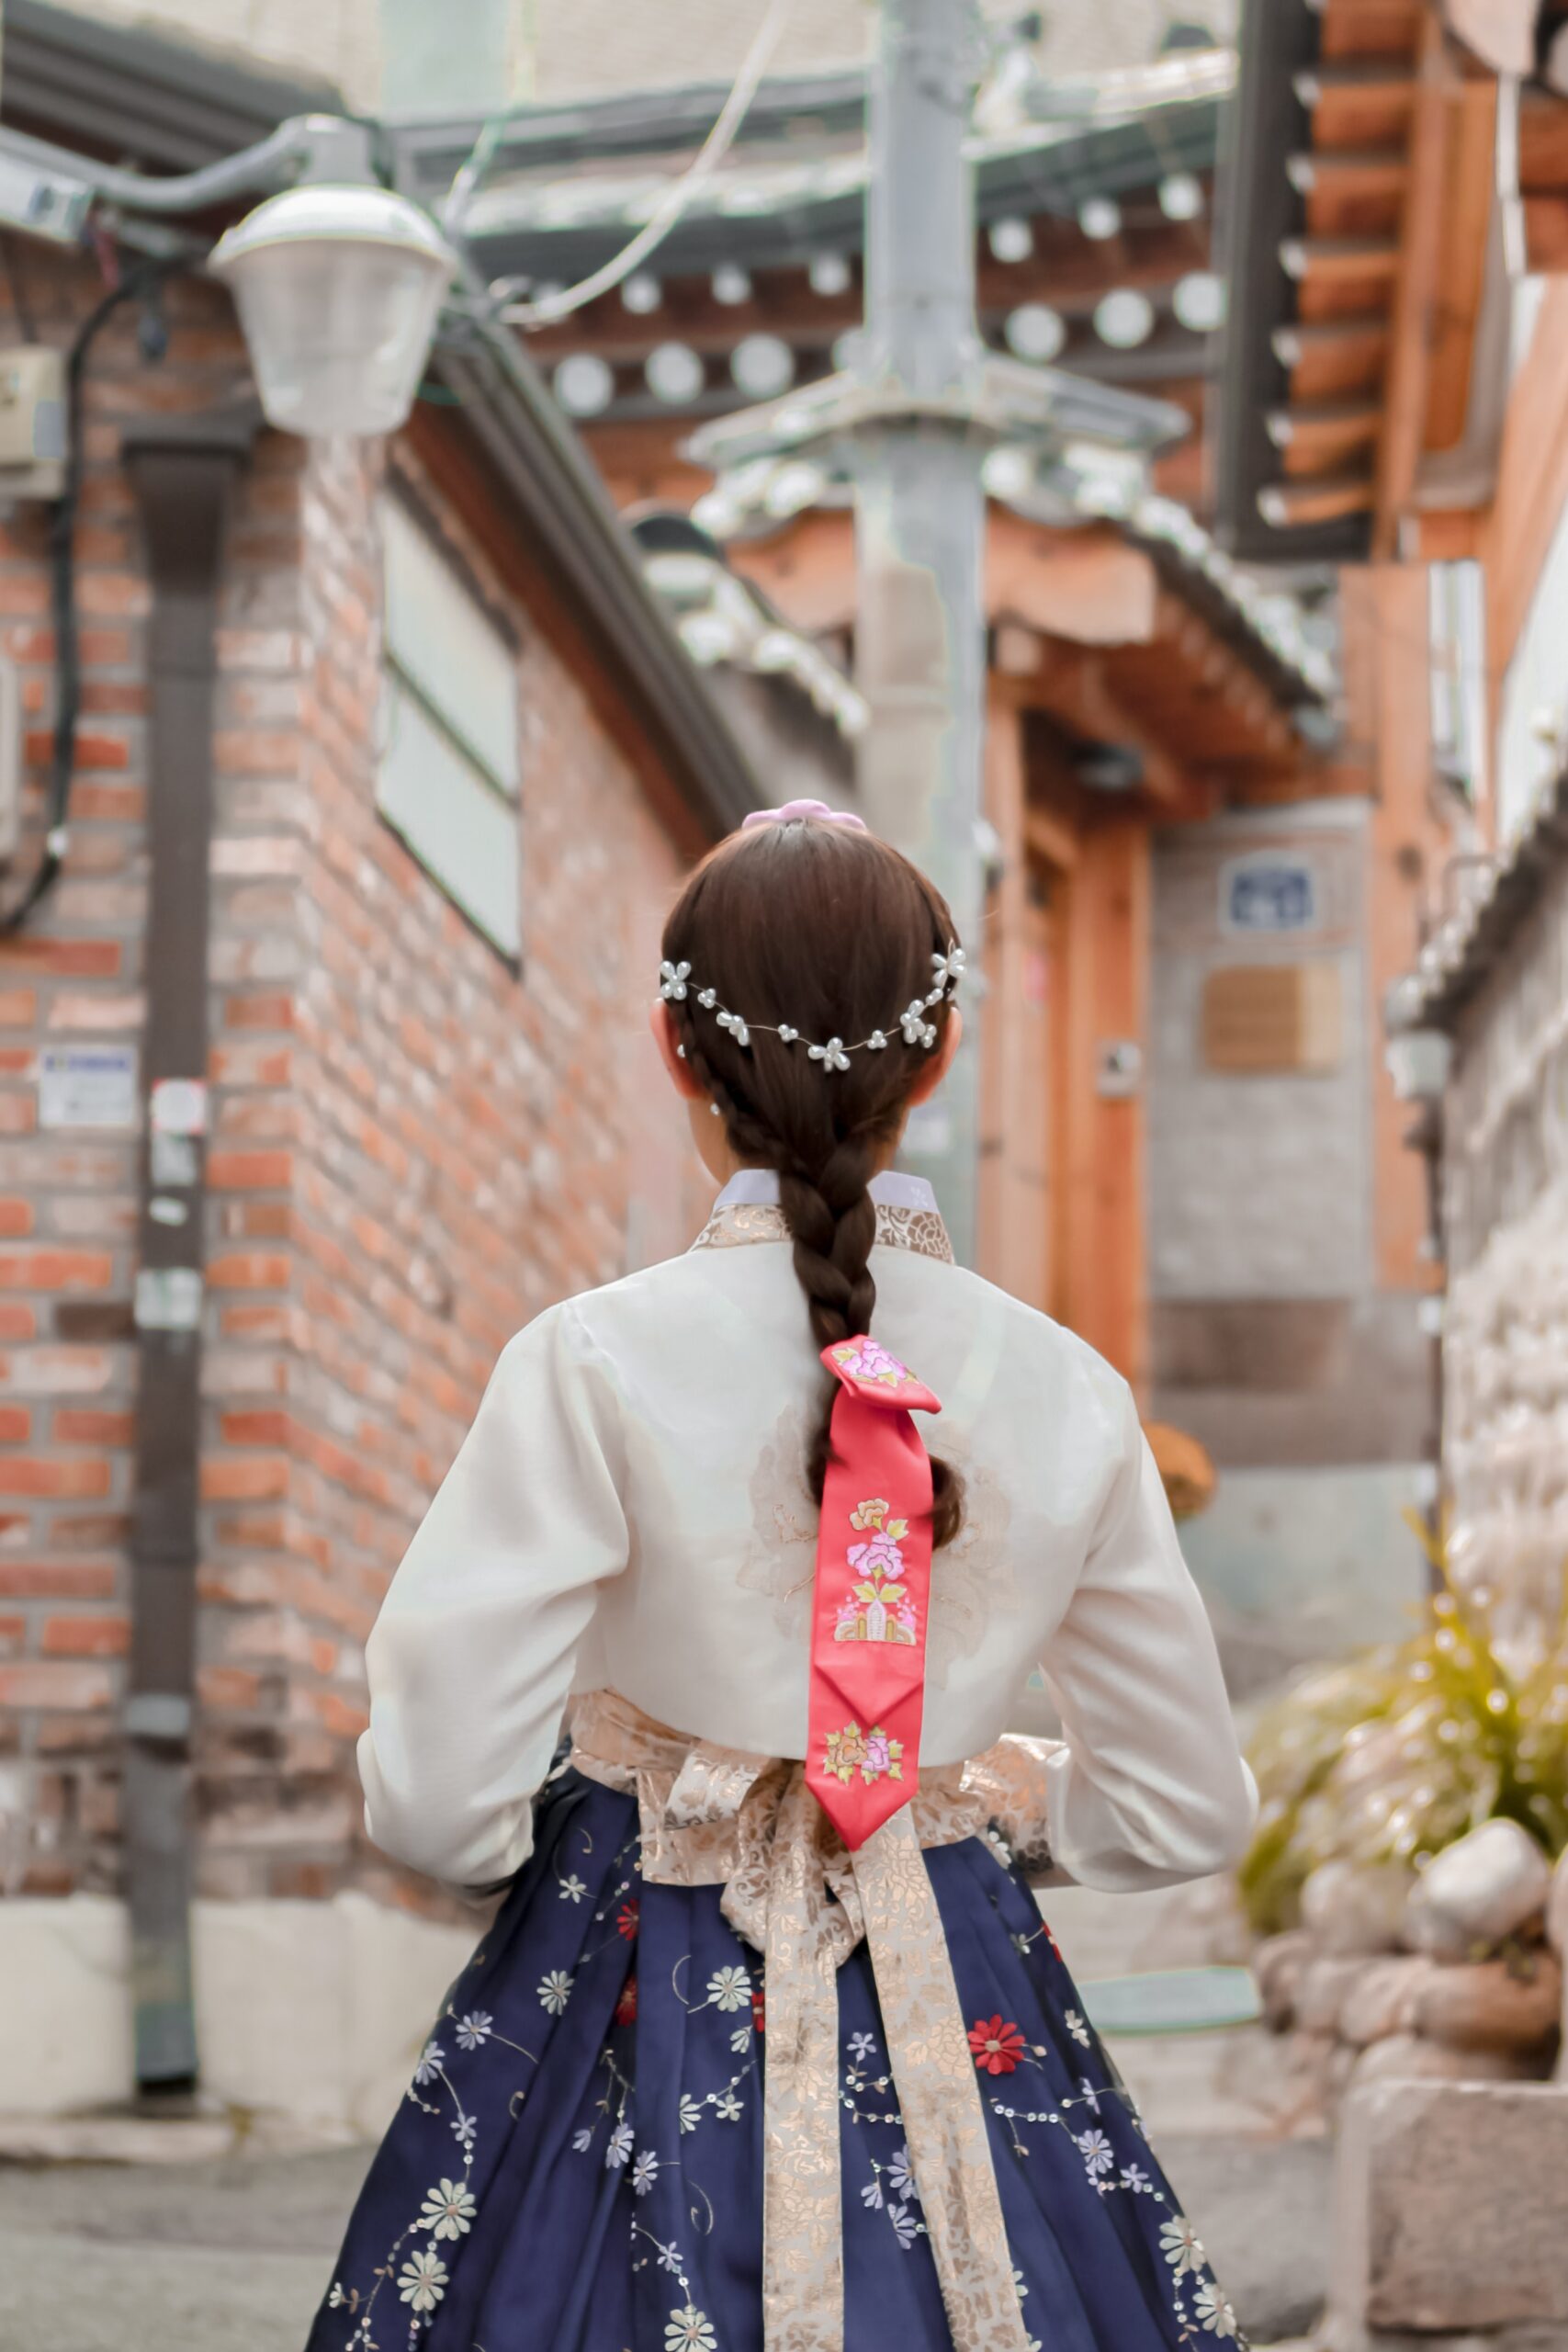 A girl who is wearing Hanbok is traveling to Bukchon in Seoul.